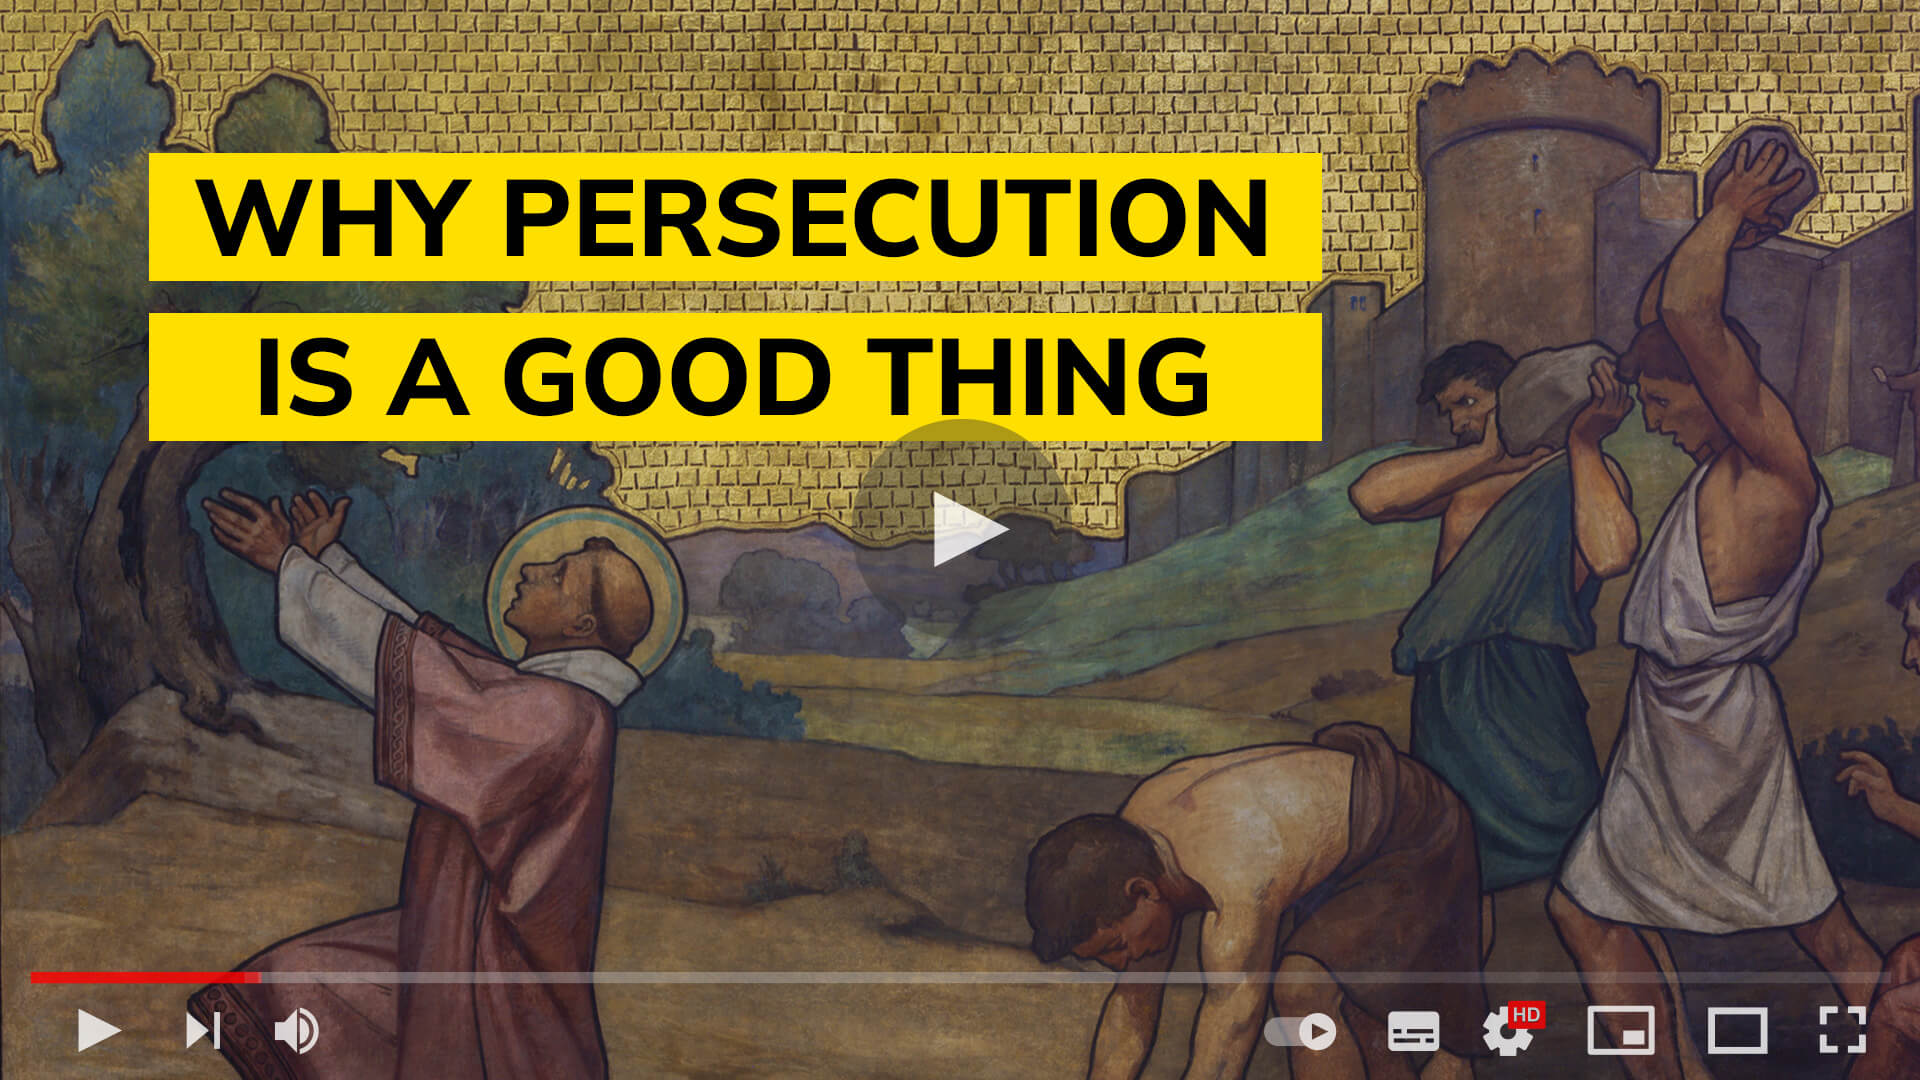 Why persecution is a good thing